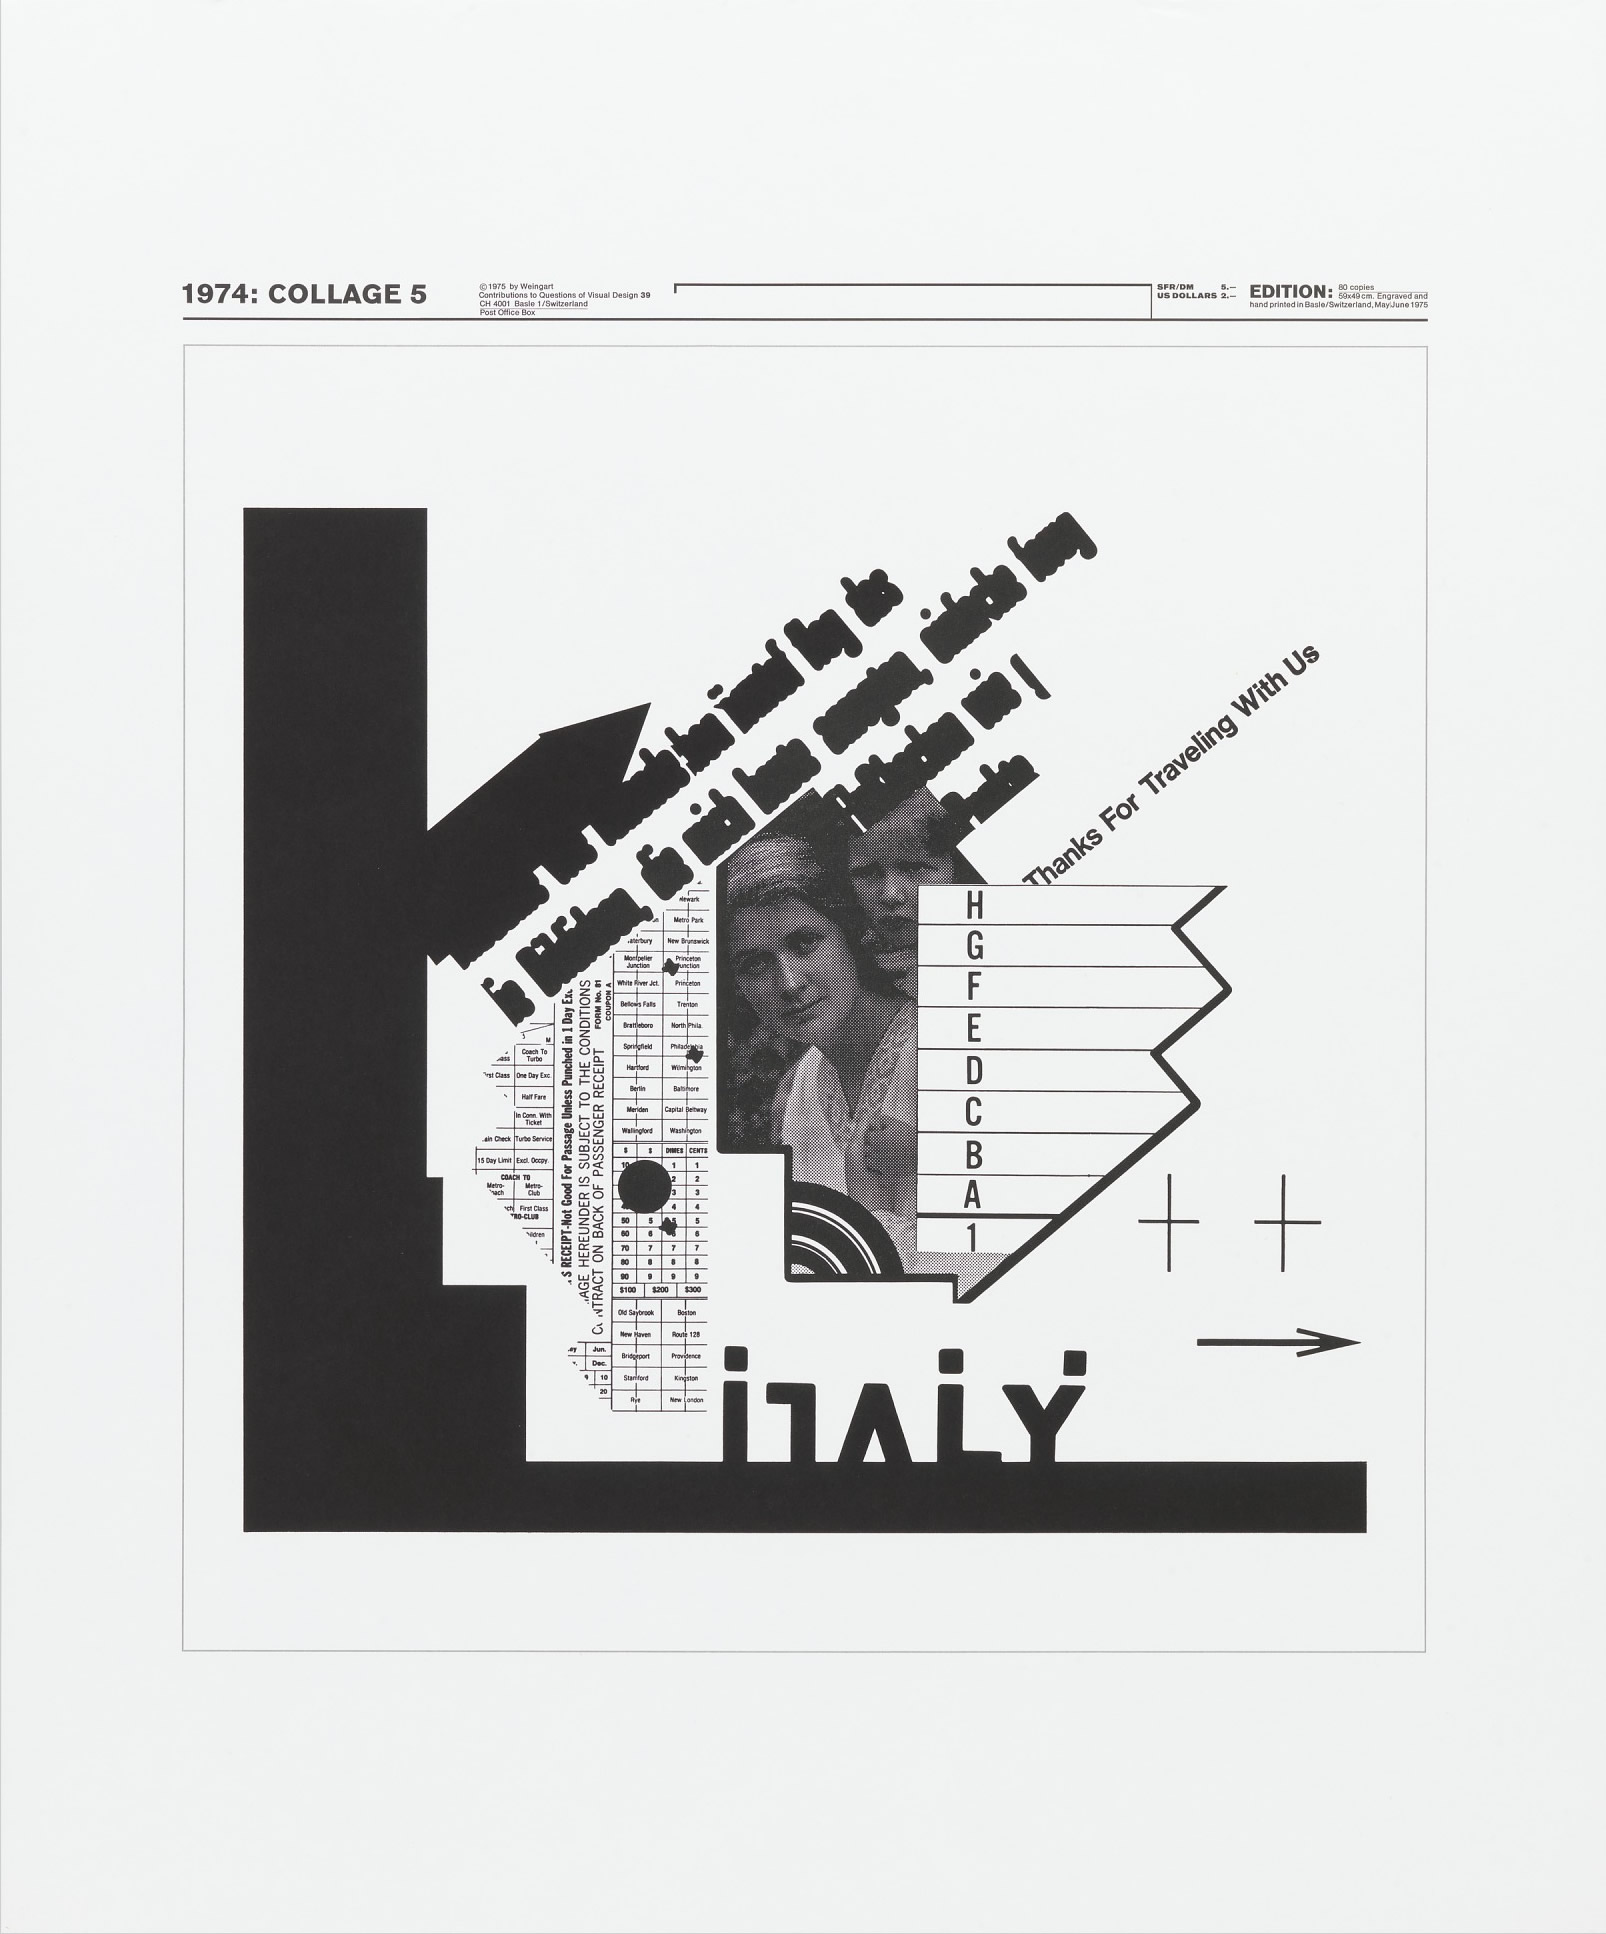 Wolfgang Weingart: 1974: Collage 5. 1975. Lithograph. (58.9 x 48.9 cm)